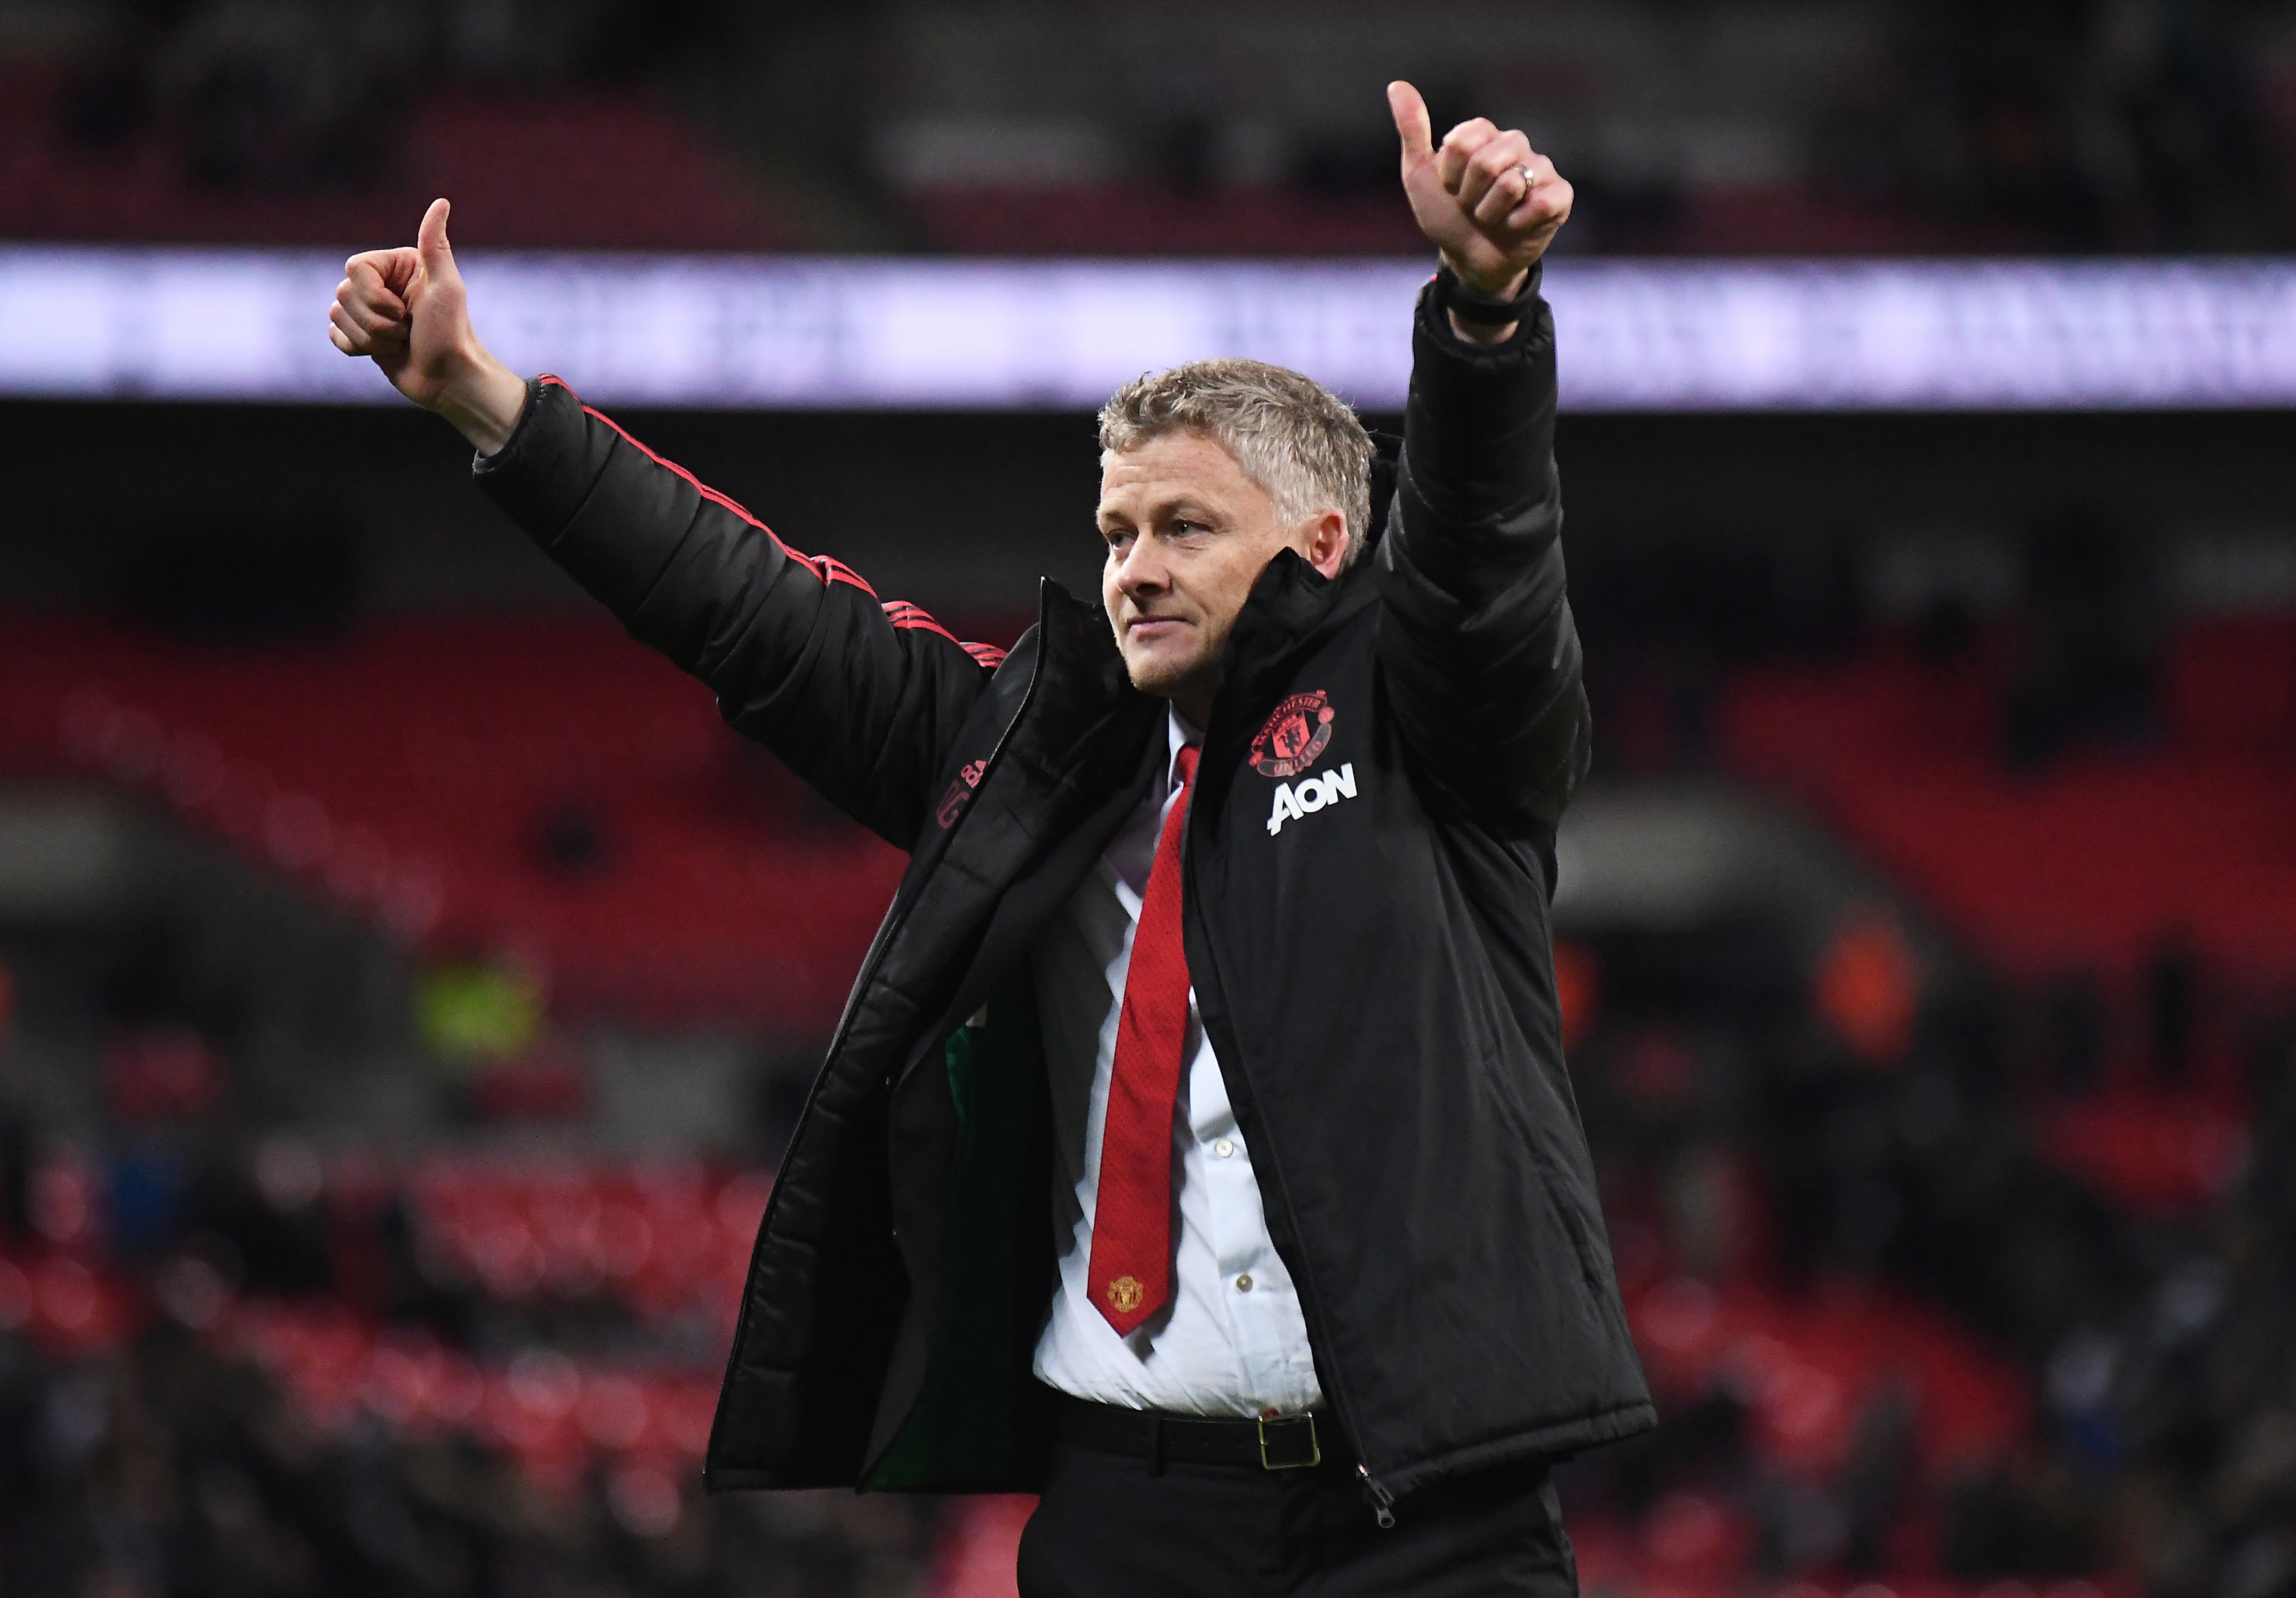 Analysing Ole Gunnar Solskjaer's first year in charge